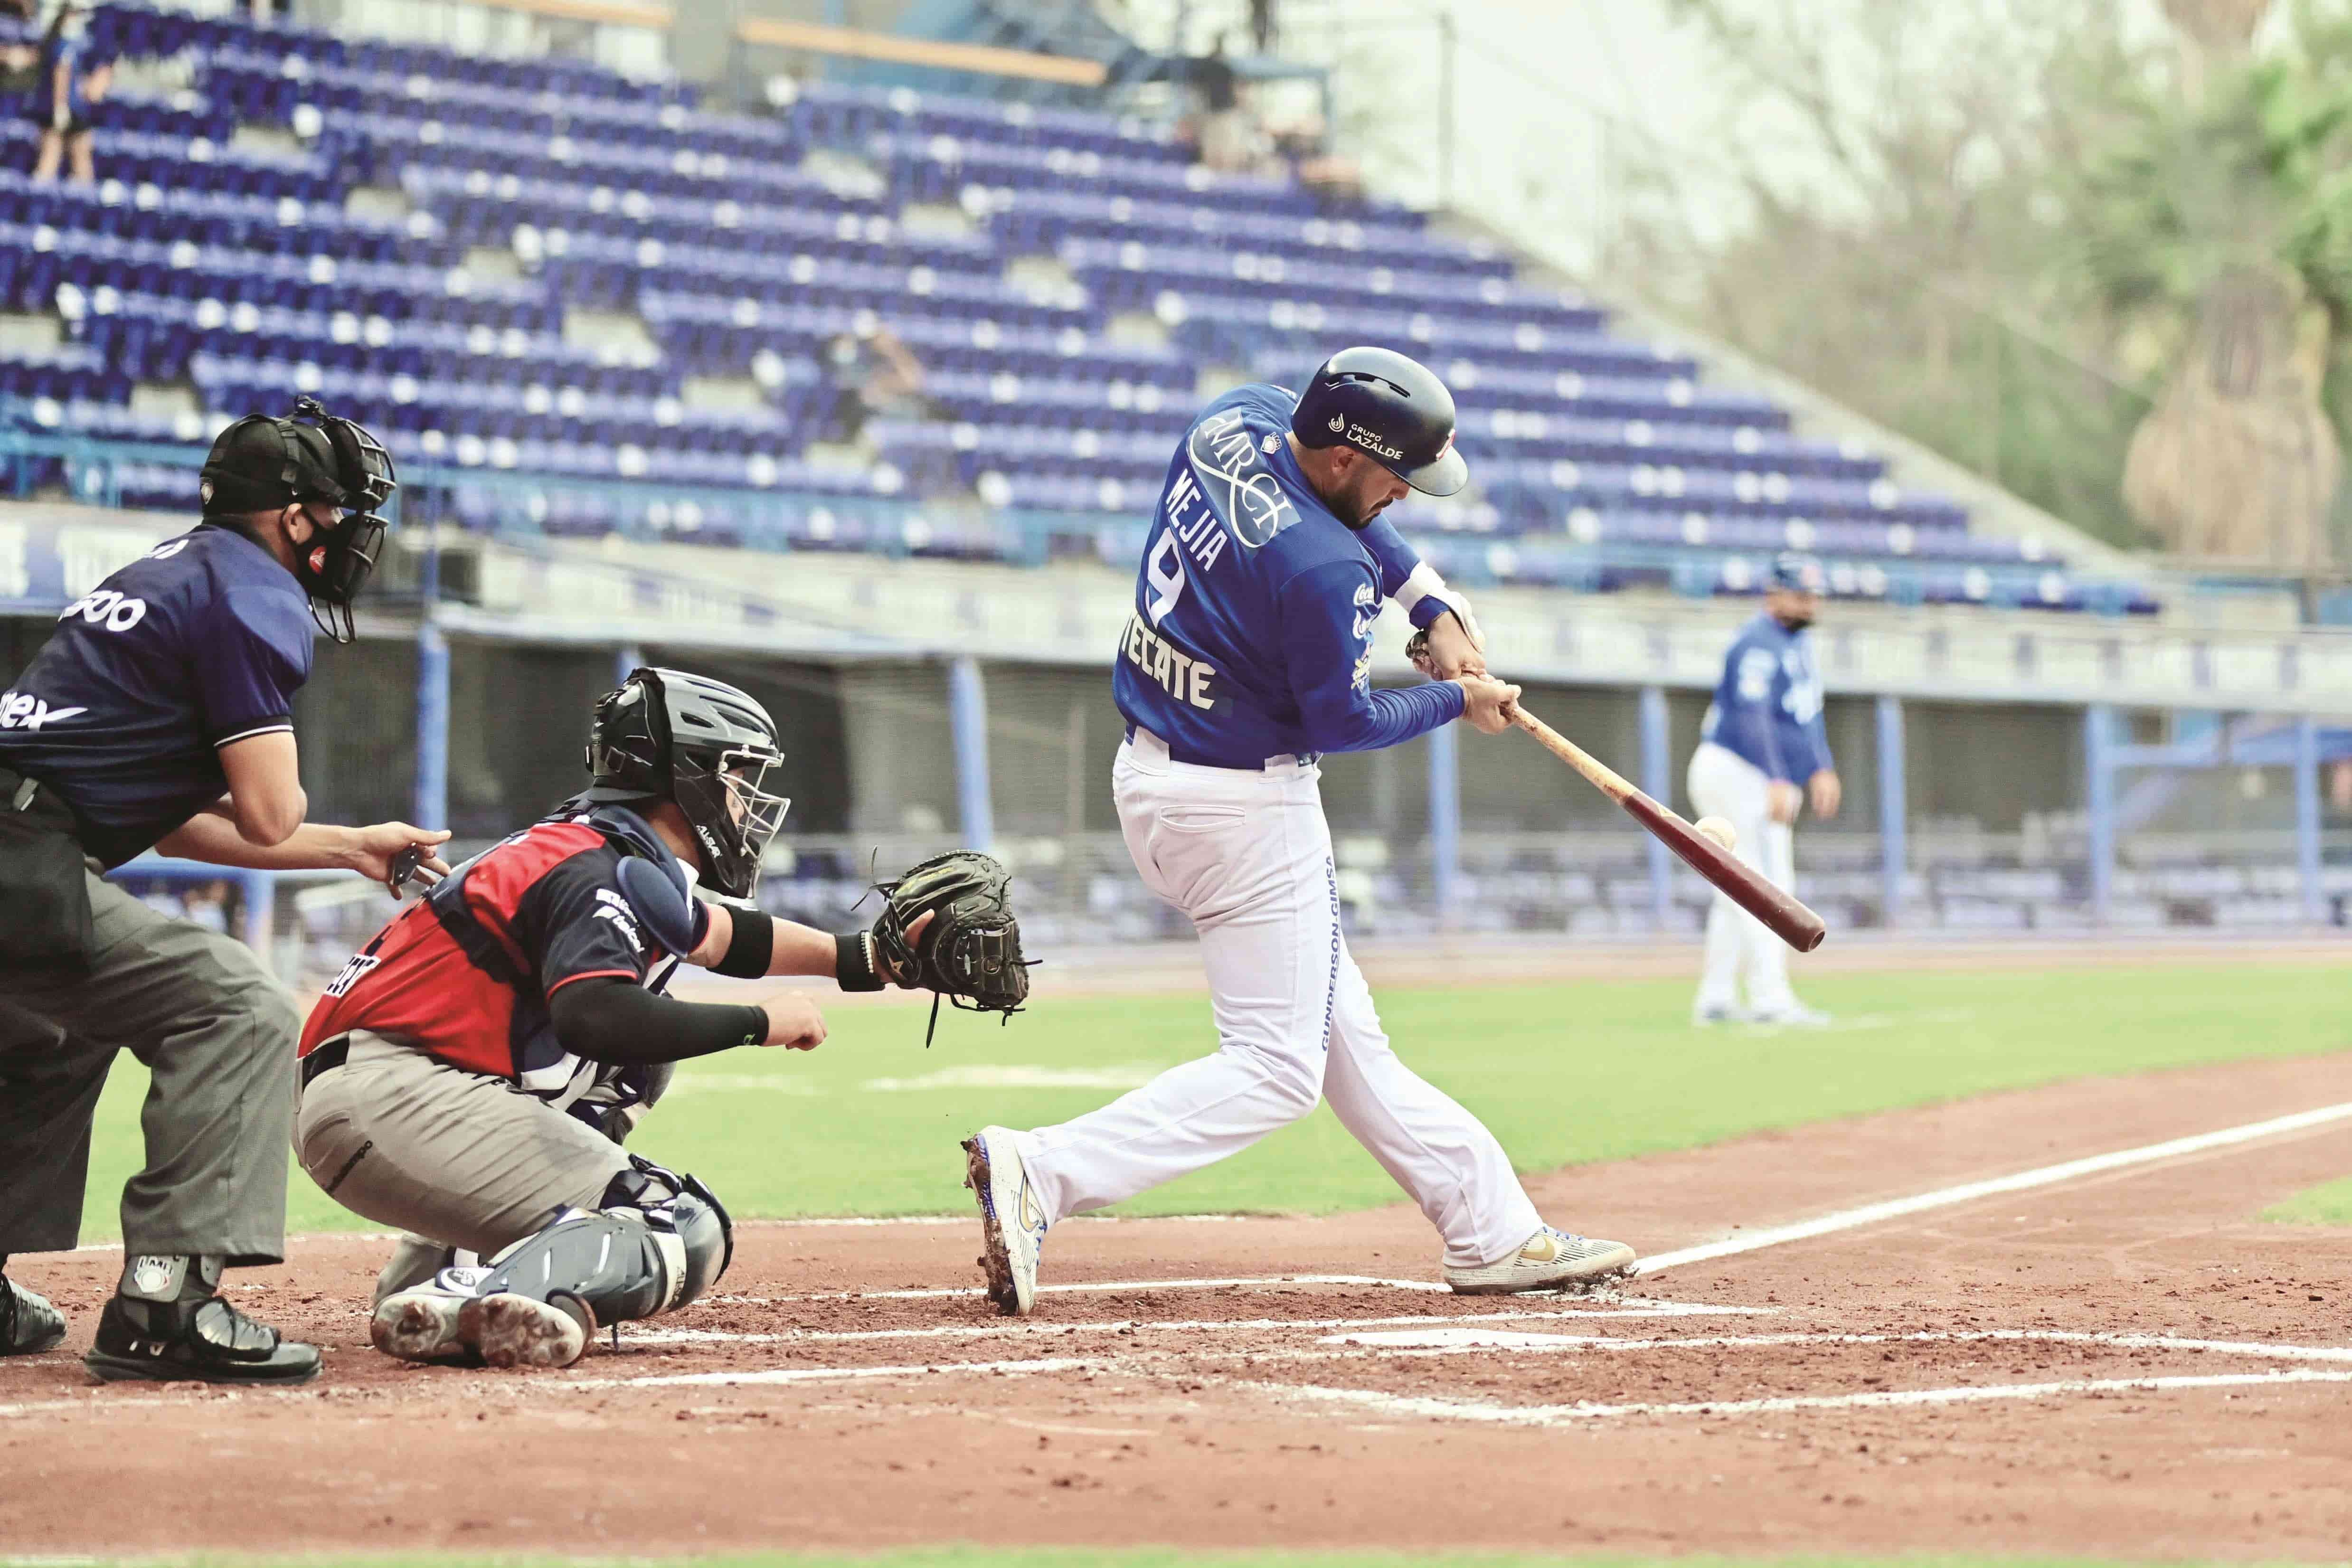 Doble golpe a Sultanes